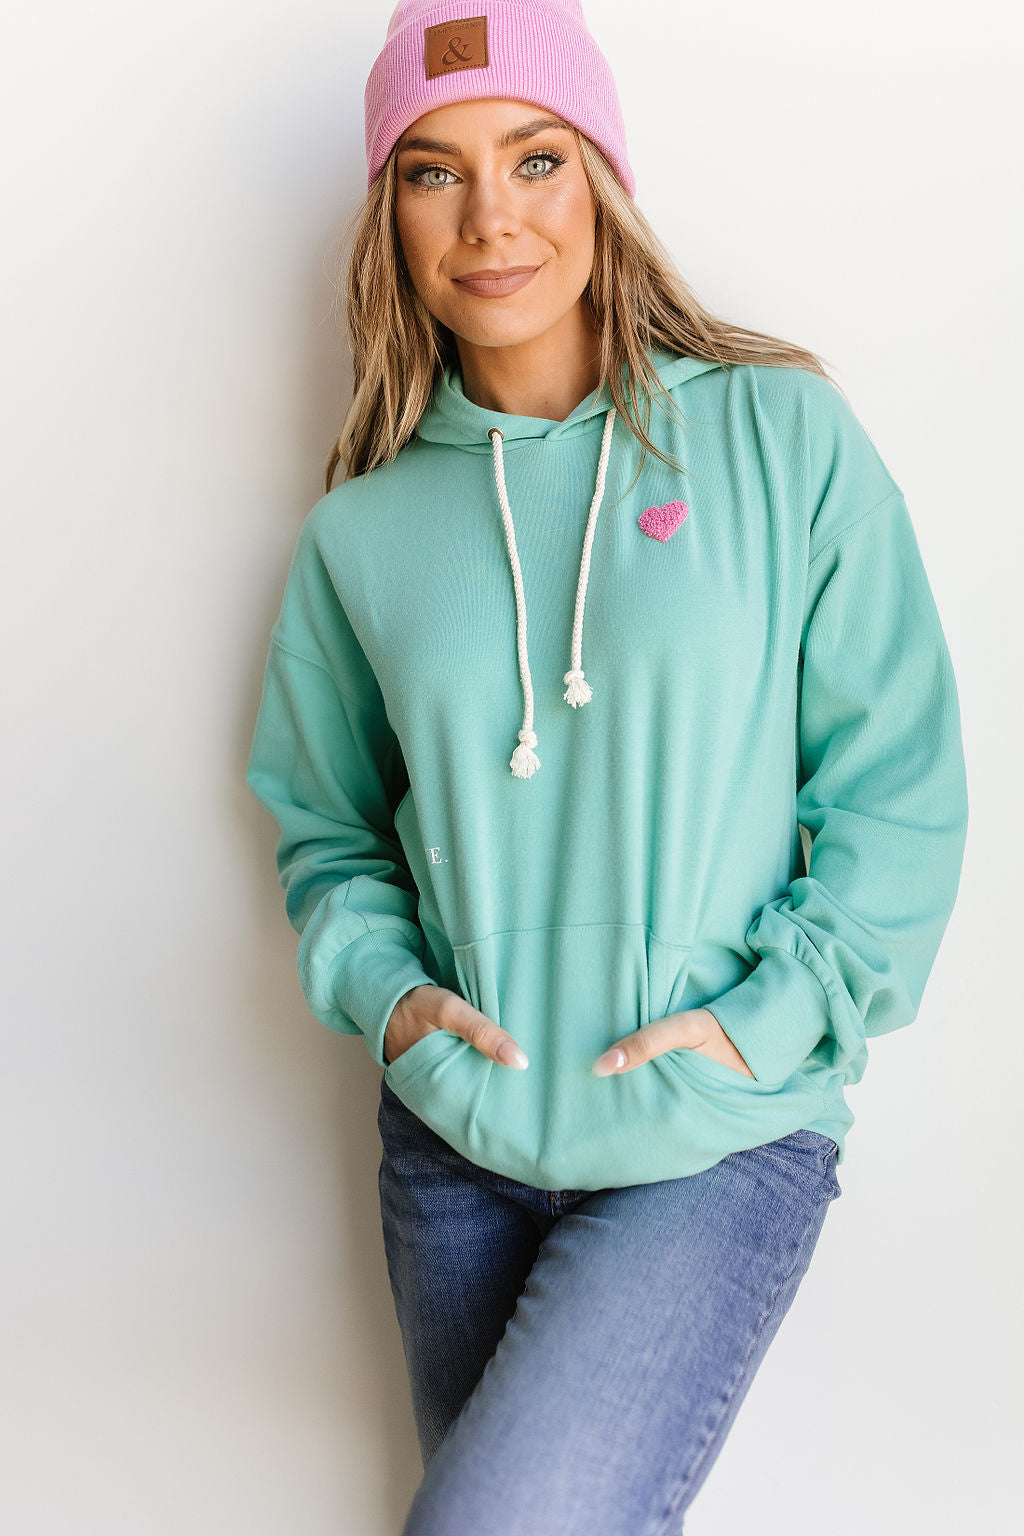 Ampersand Avenue University Hoodie - You Are More Than Enough